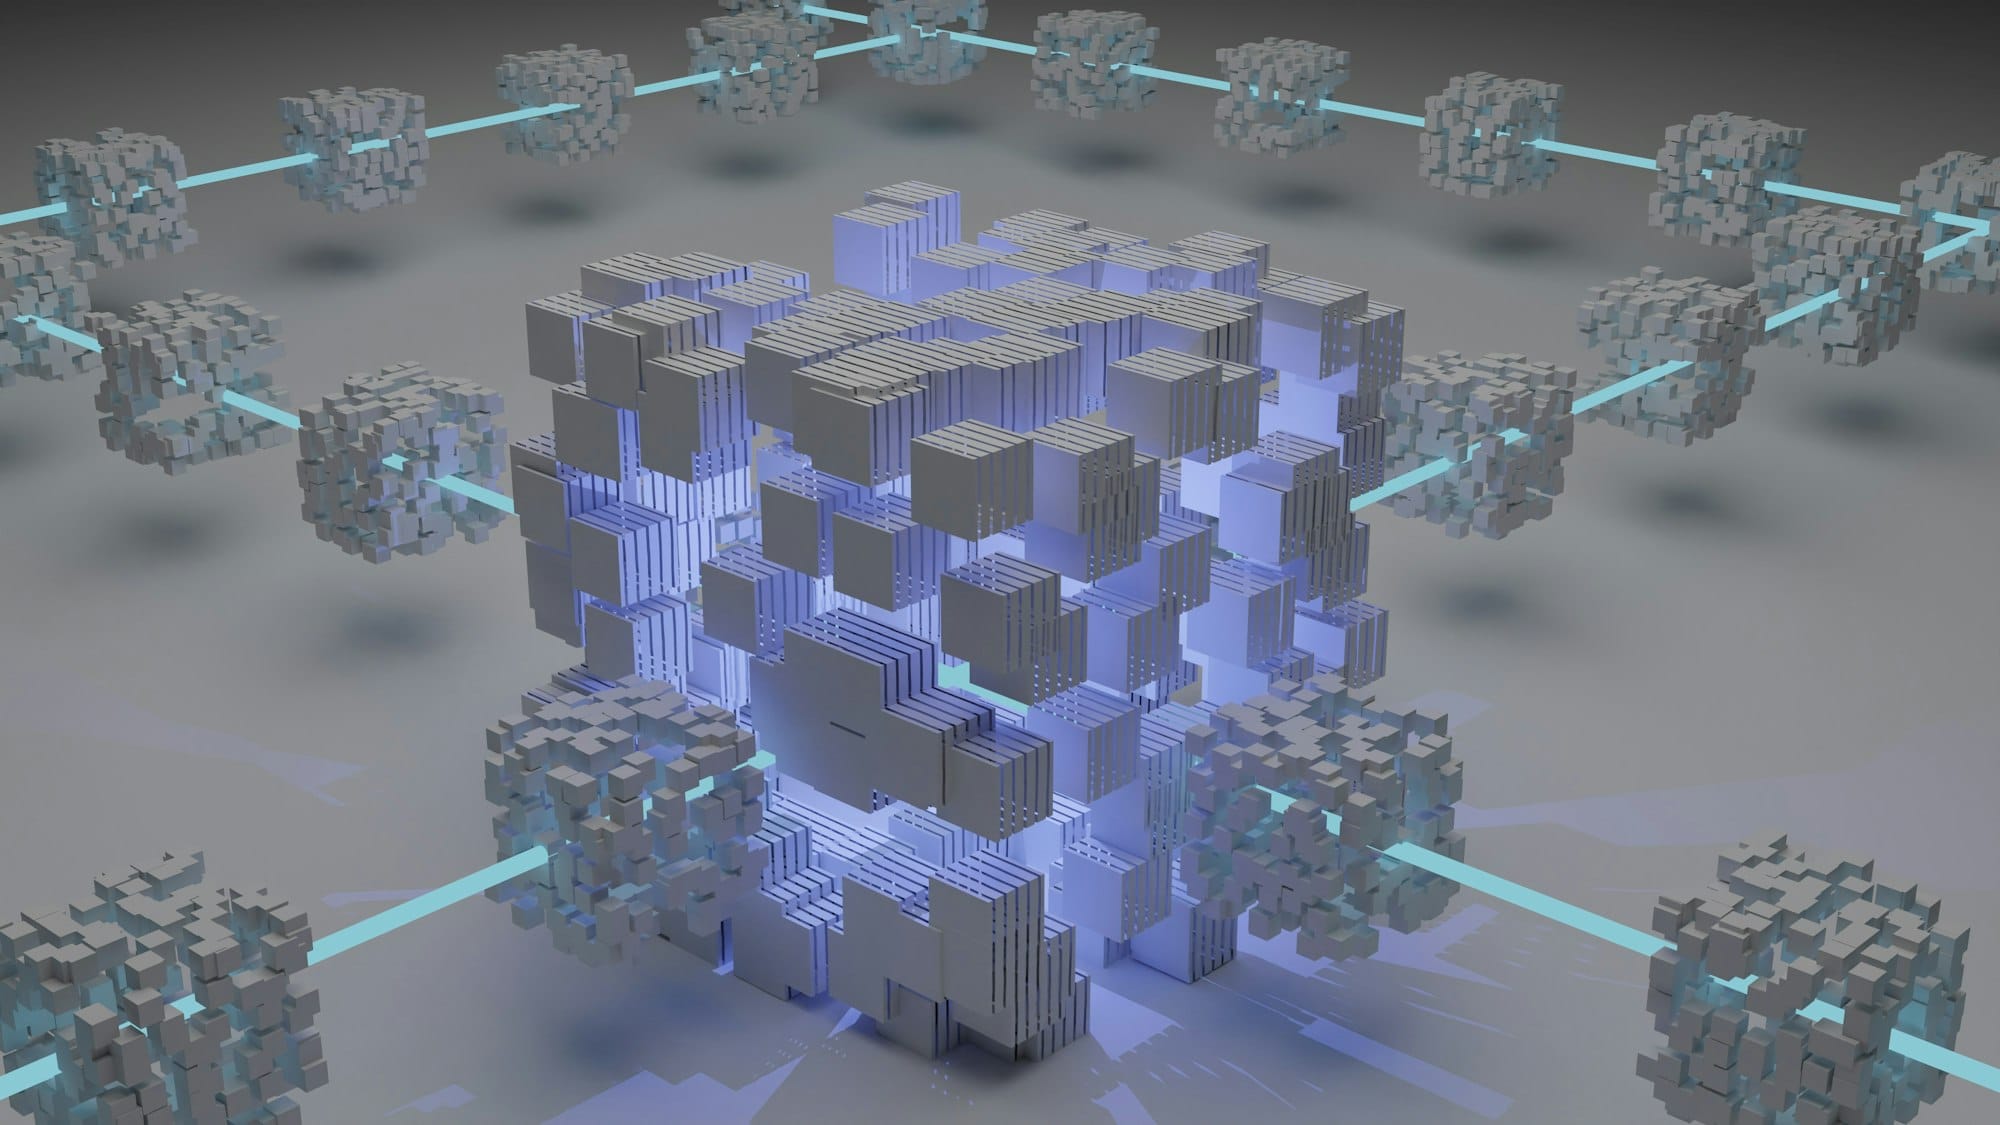 An intricate 3D representation of bricks interconnected, symbolizing the foundational strength and interconnectedness of the TON Blockchain within The Open Network ecosystem. This image vividly captures the essence of Toncoin, showcasing the robust and secure infrastructure of the TON Crypto world. Each brick represents the solid, building blocks of the TON Platform, illustrating how each component is crucial to the network's overall integrity and functionality.